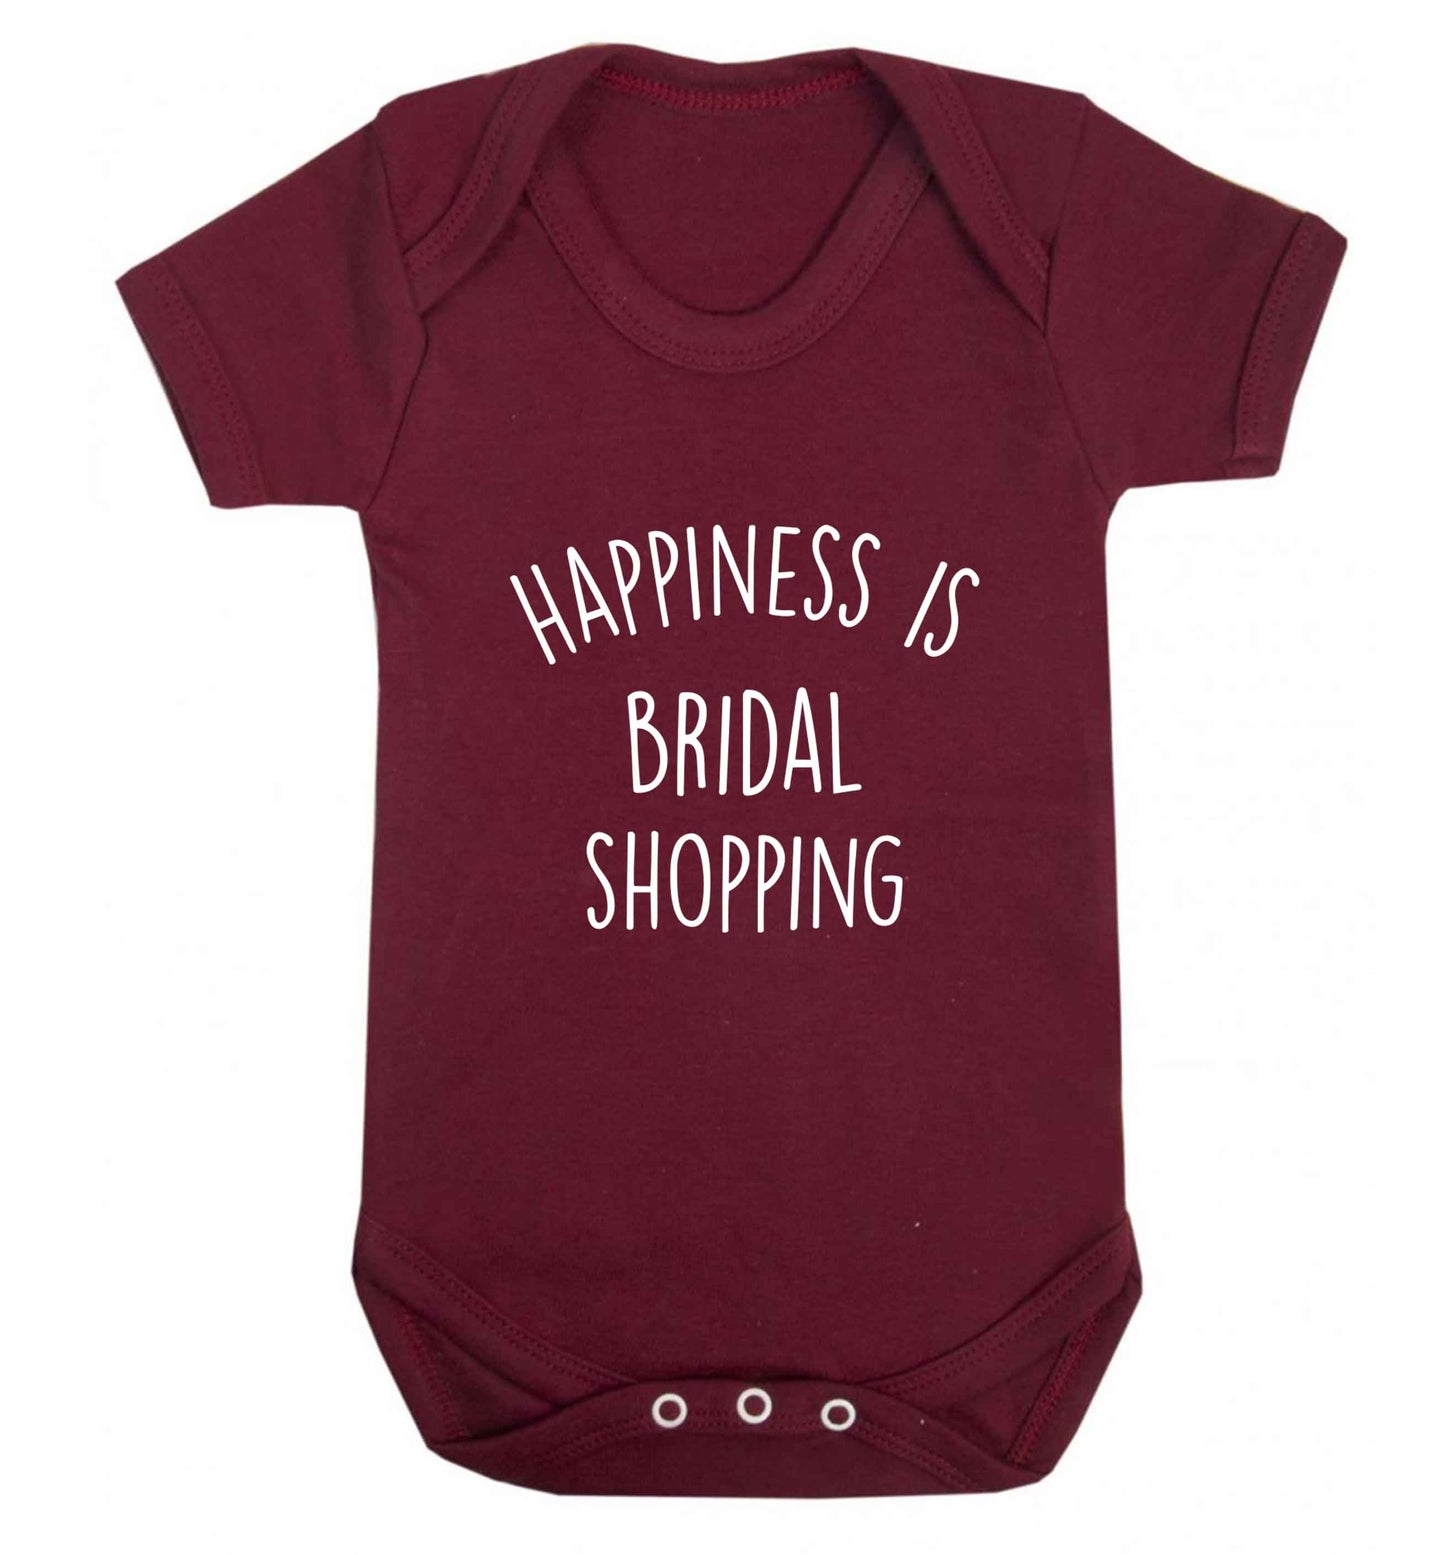 Happiness is bridal shopping baby vest maroon 18-24 months